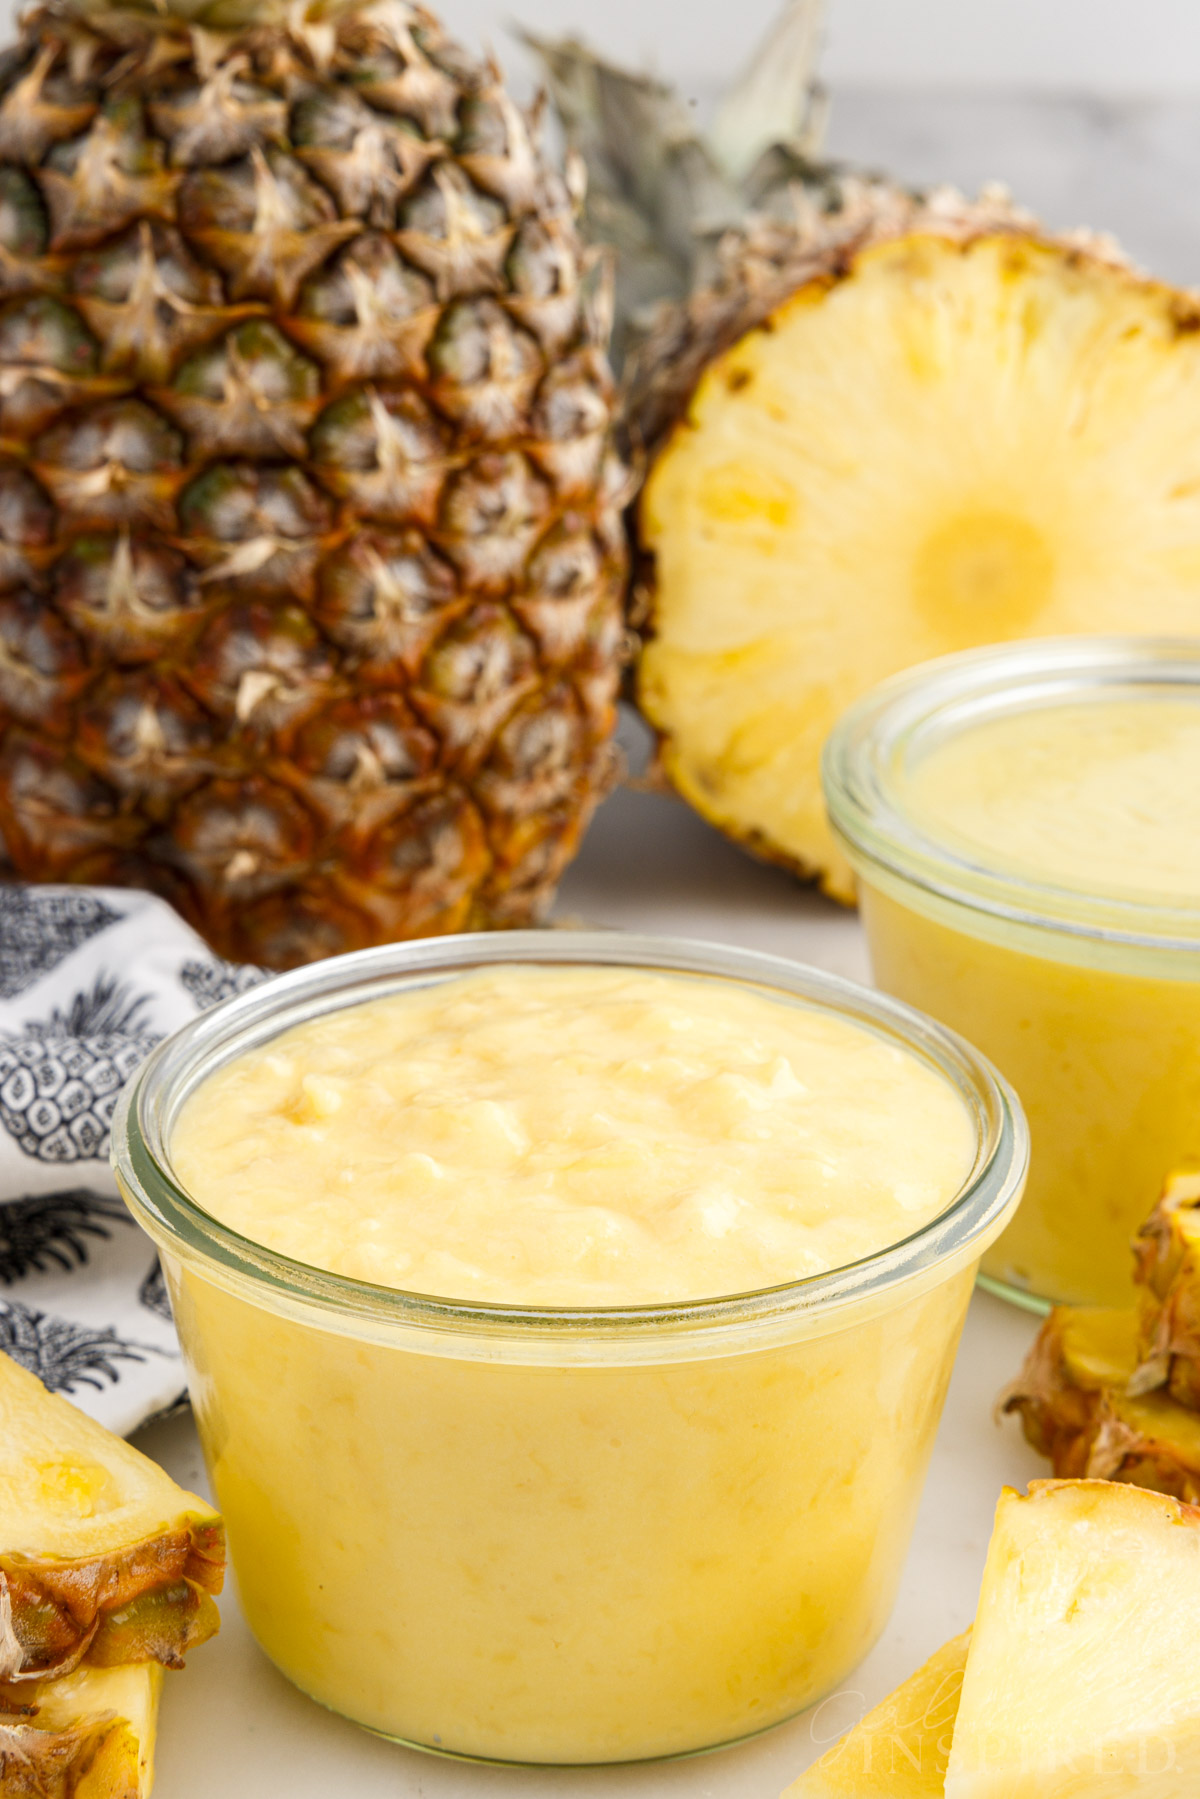 Mason jar filled with curd, a pineapple and additional jars.